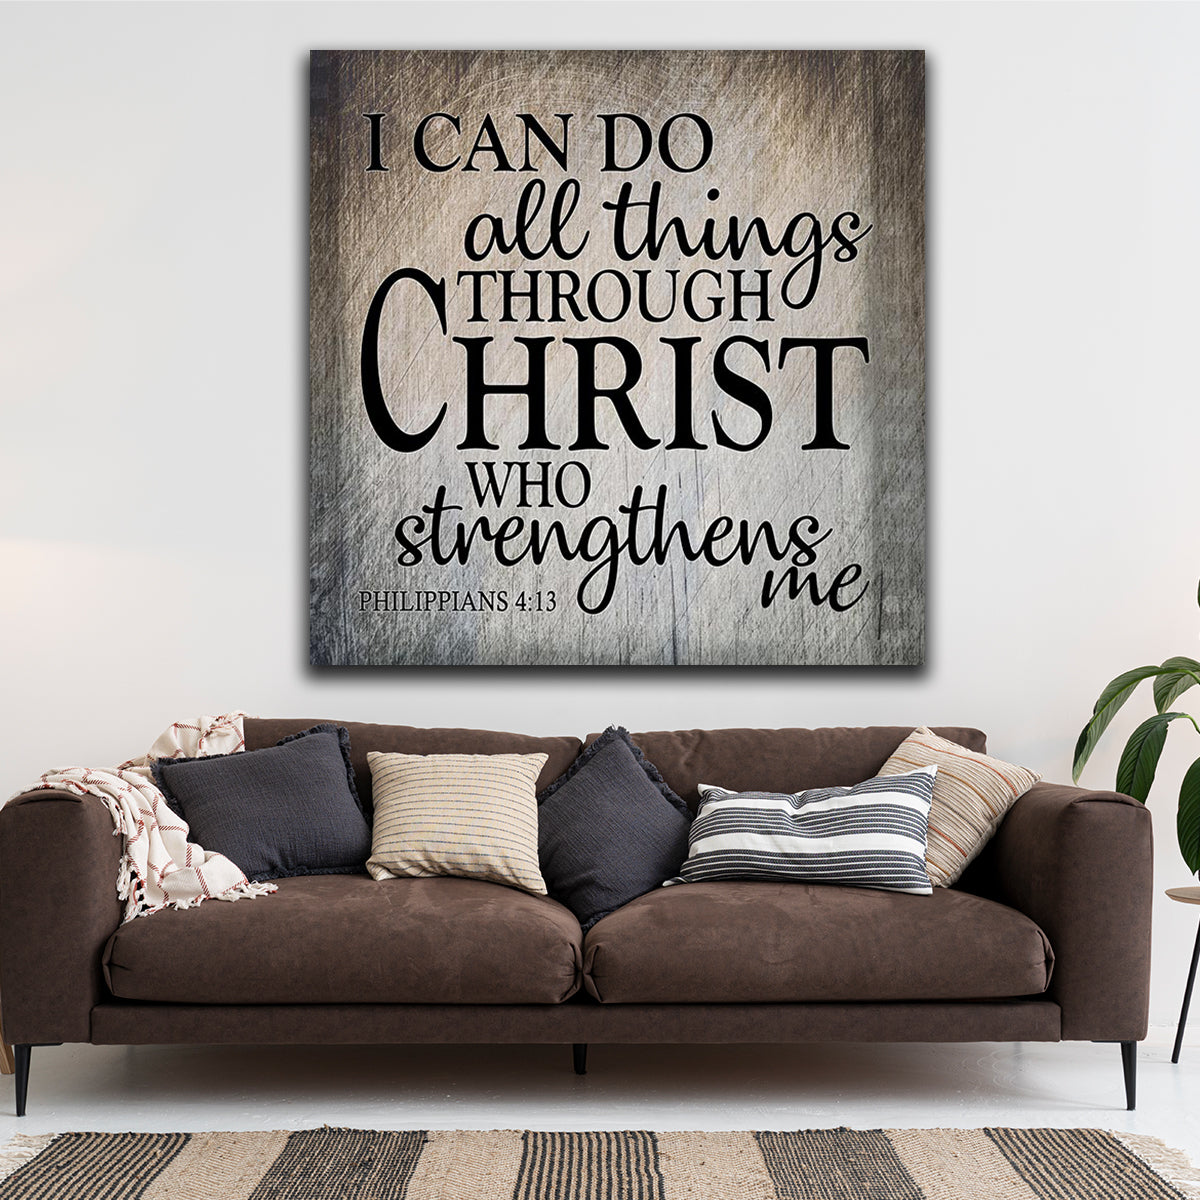 I Can Do All Things - Philippians 4:13 Premium Square Canvas